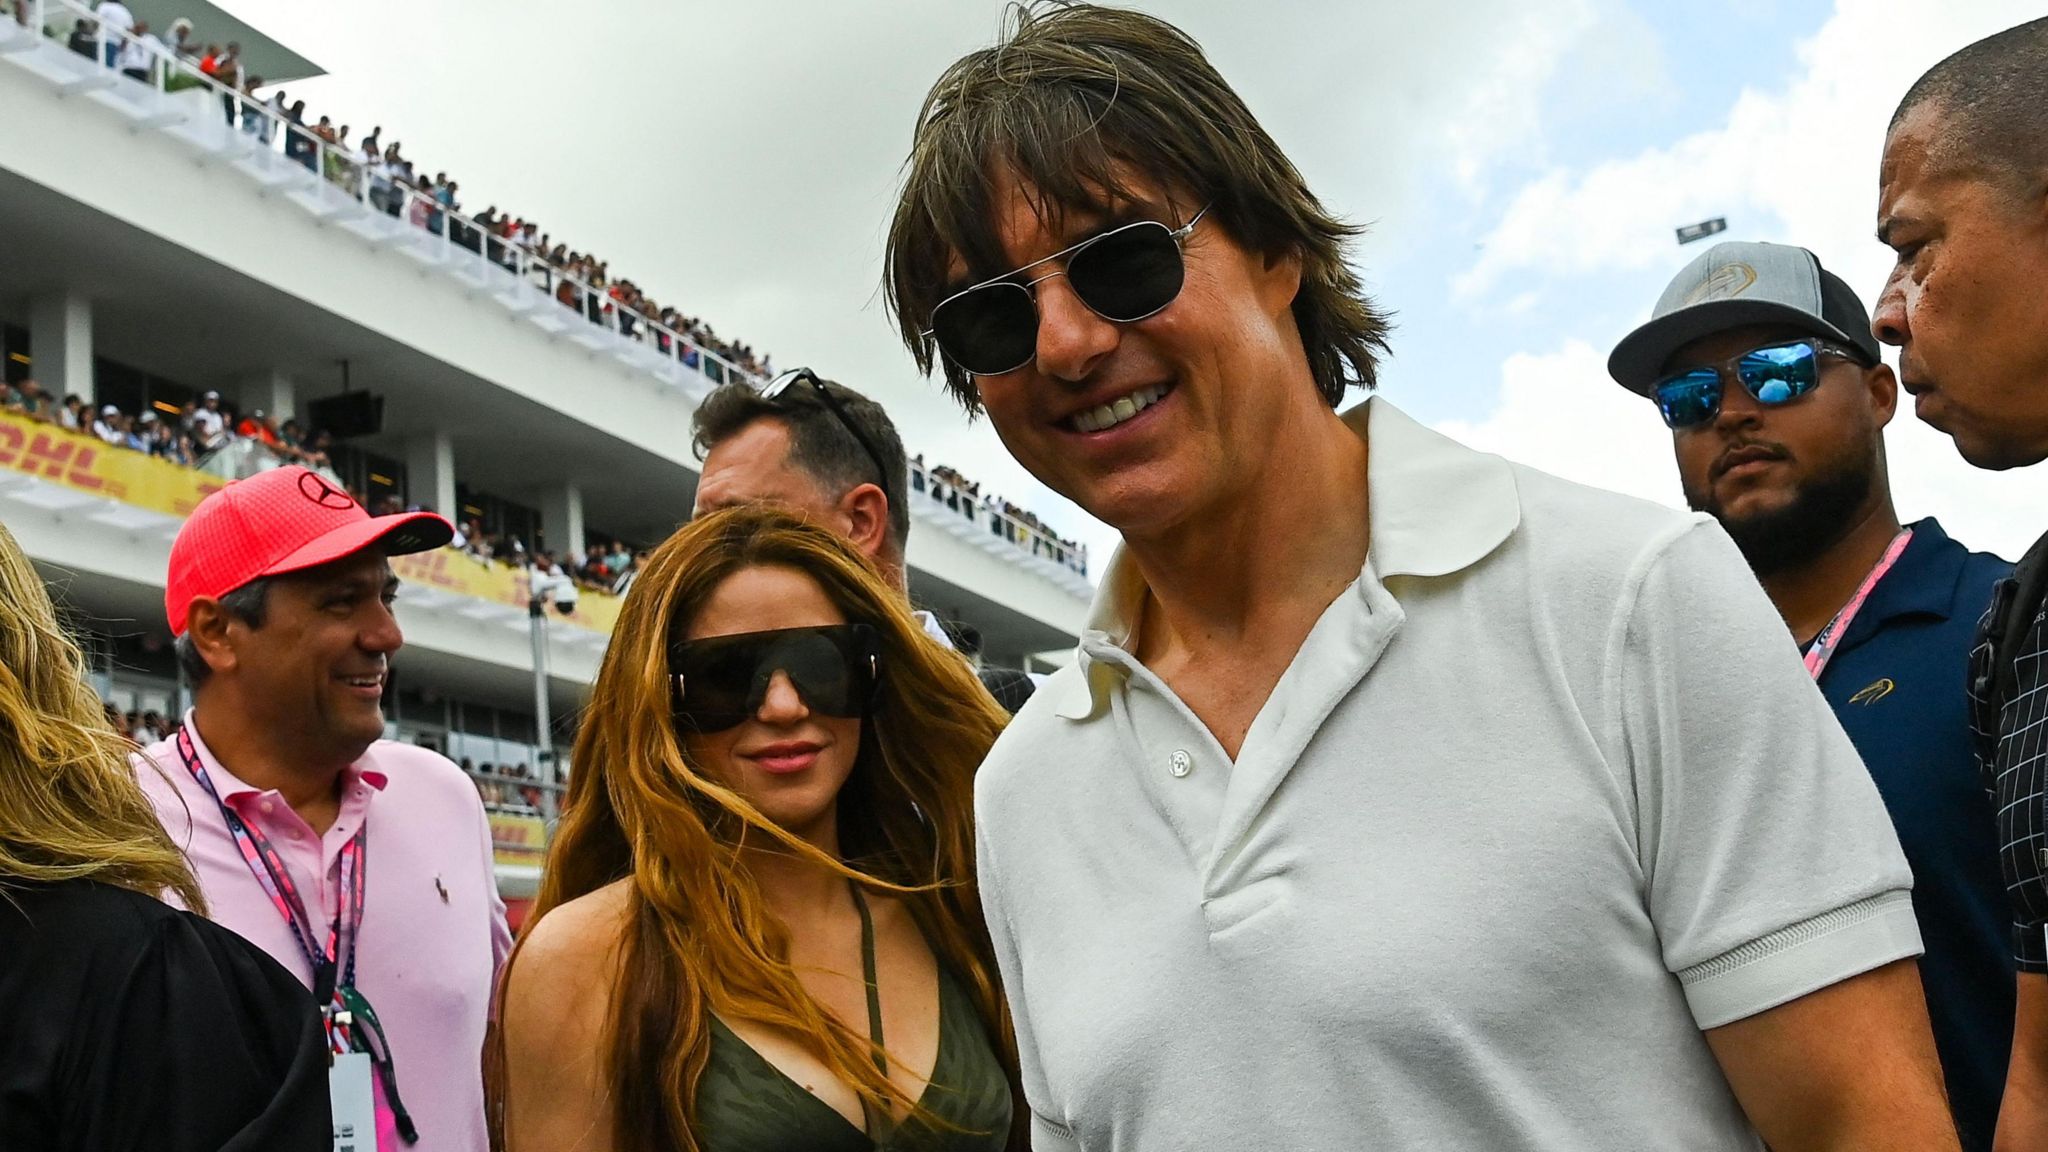 Actor Tom Cruise and singer Shakira pose for a photograph on the grid at the 2023 Miami Grand Prix